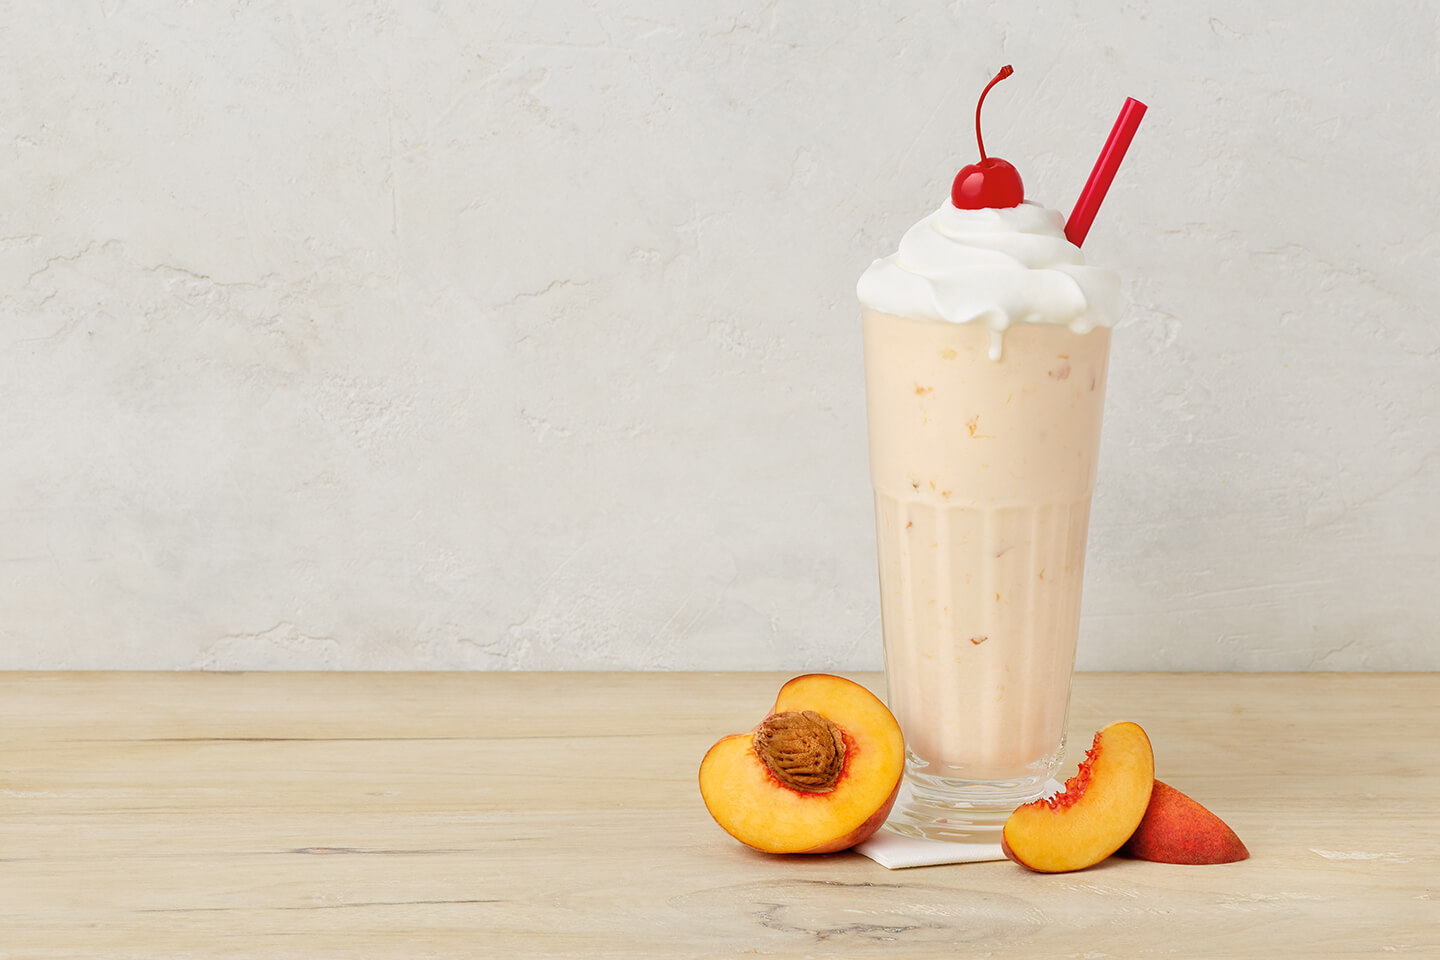 Which cities love the Peach Milkshake the most? ChickfilA